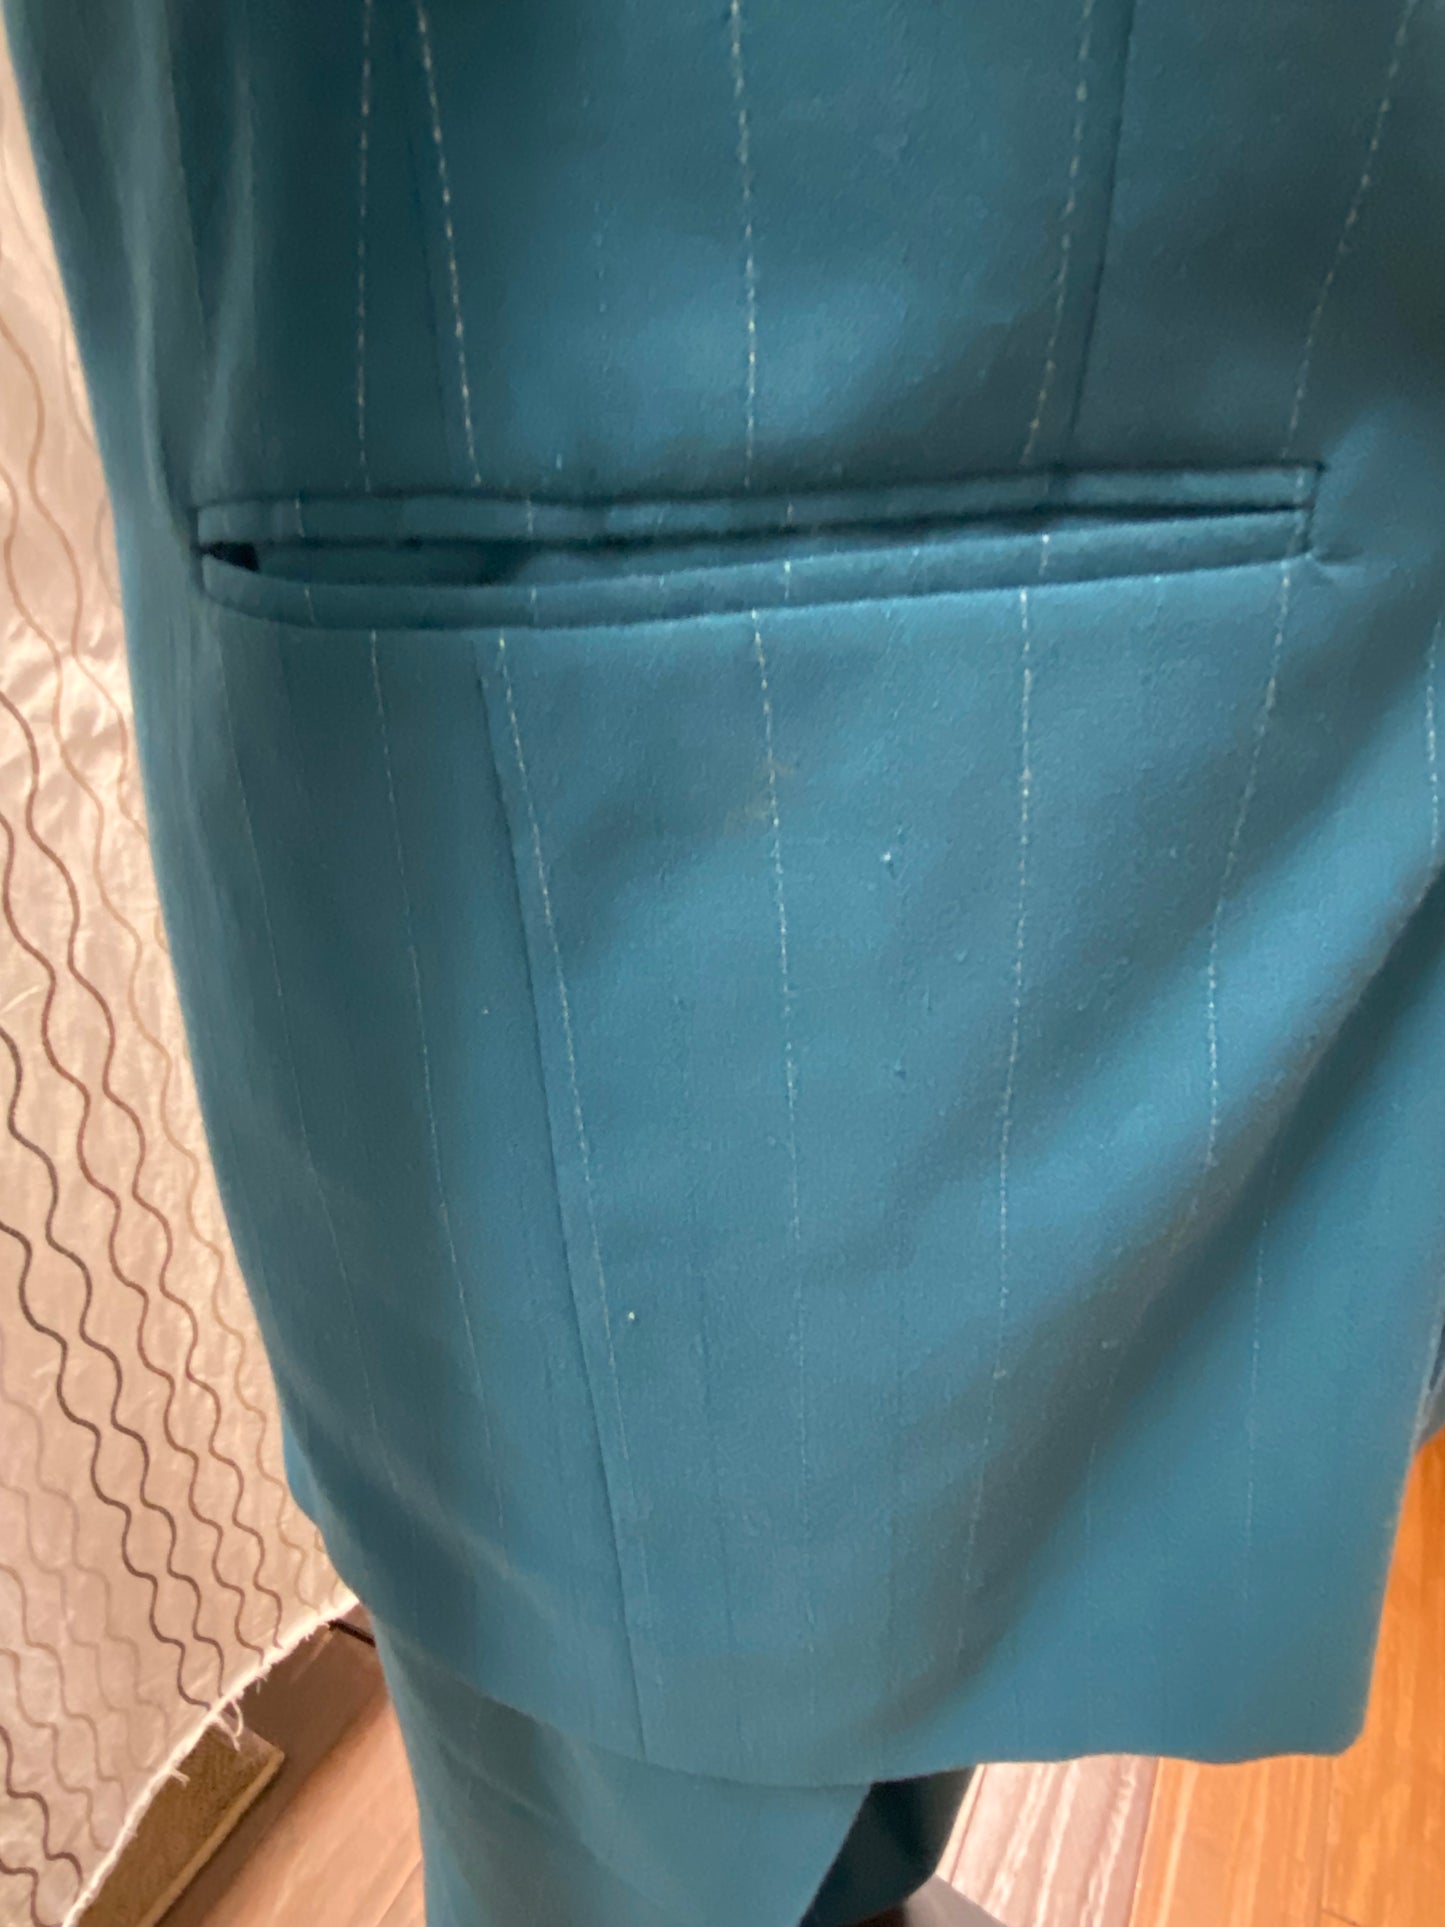 New 1980 Teal Pinstripe Double Breasted Wide Lapel Suit Gangster